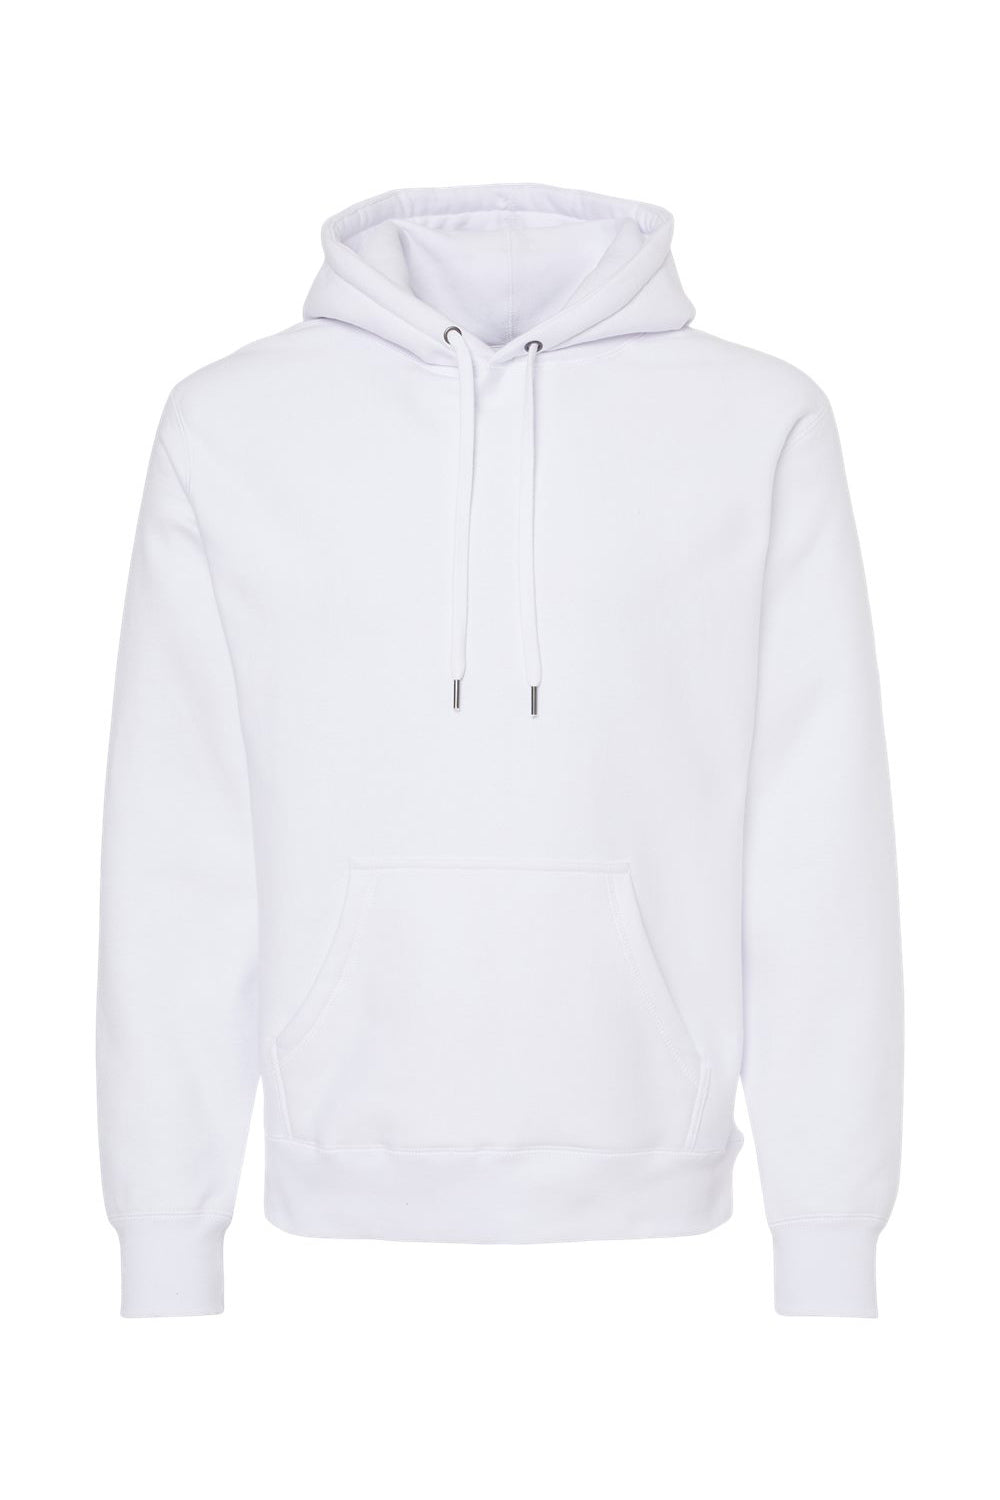 Independent Trading Co. IND5000P Mens Legend Hooded Sweatshirt Hoodie White Flat Front